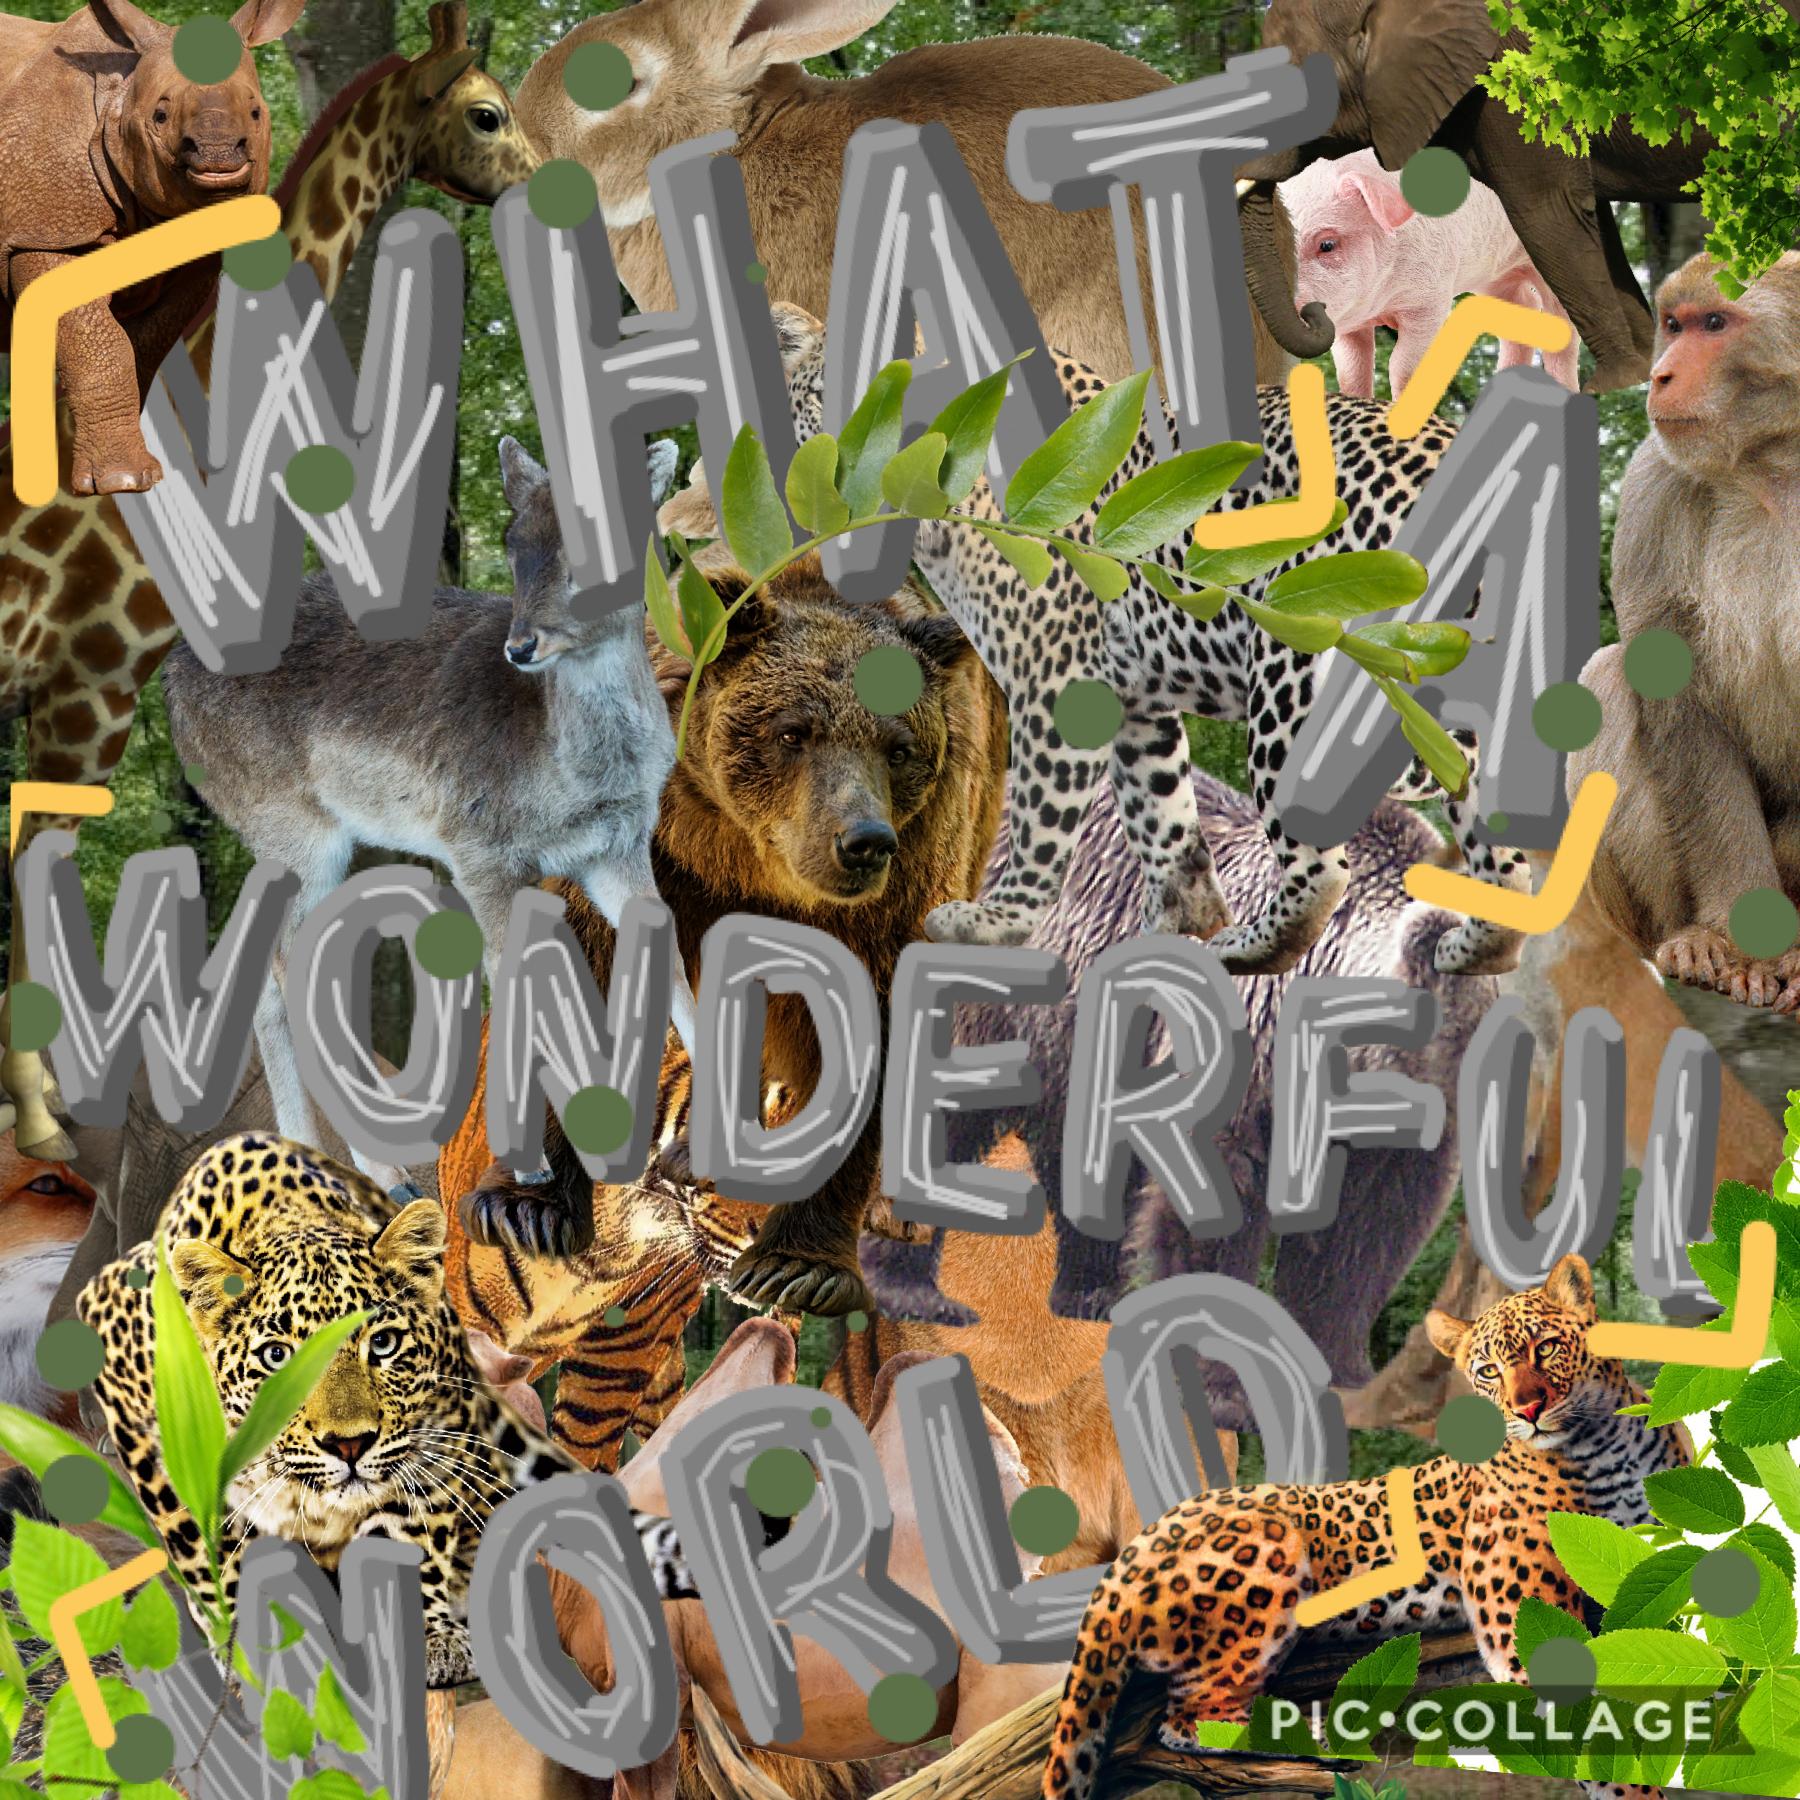 🐅🐆🦓🦍🦧TAP🐘🦛🦏🐪🐫🦒🦘🐃🐂🐄🐖🐏🐑🦙🐐🦌🐓

What’s your favorite animal? comment below! 